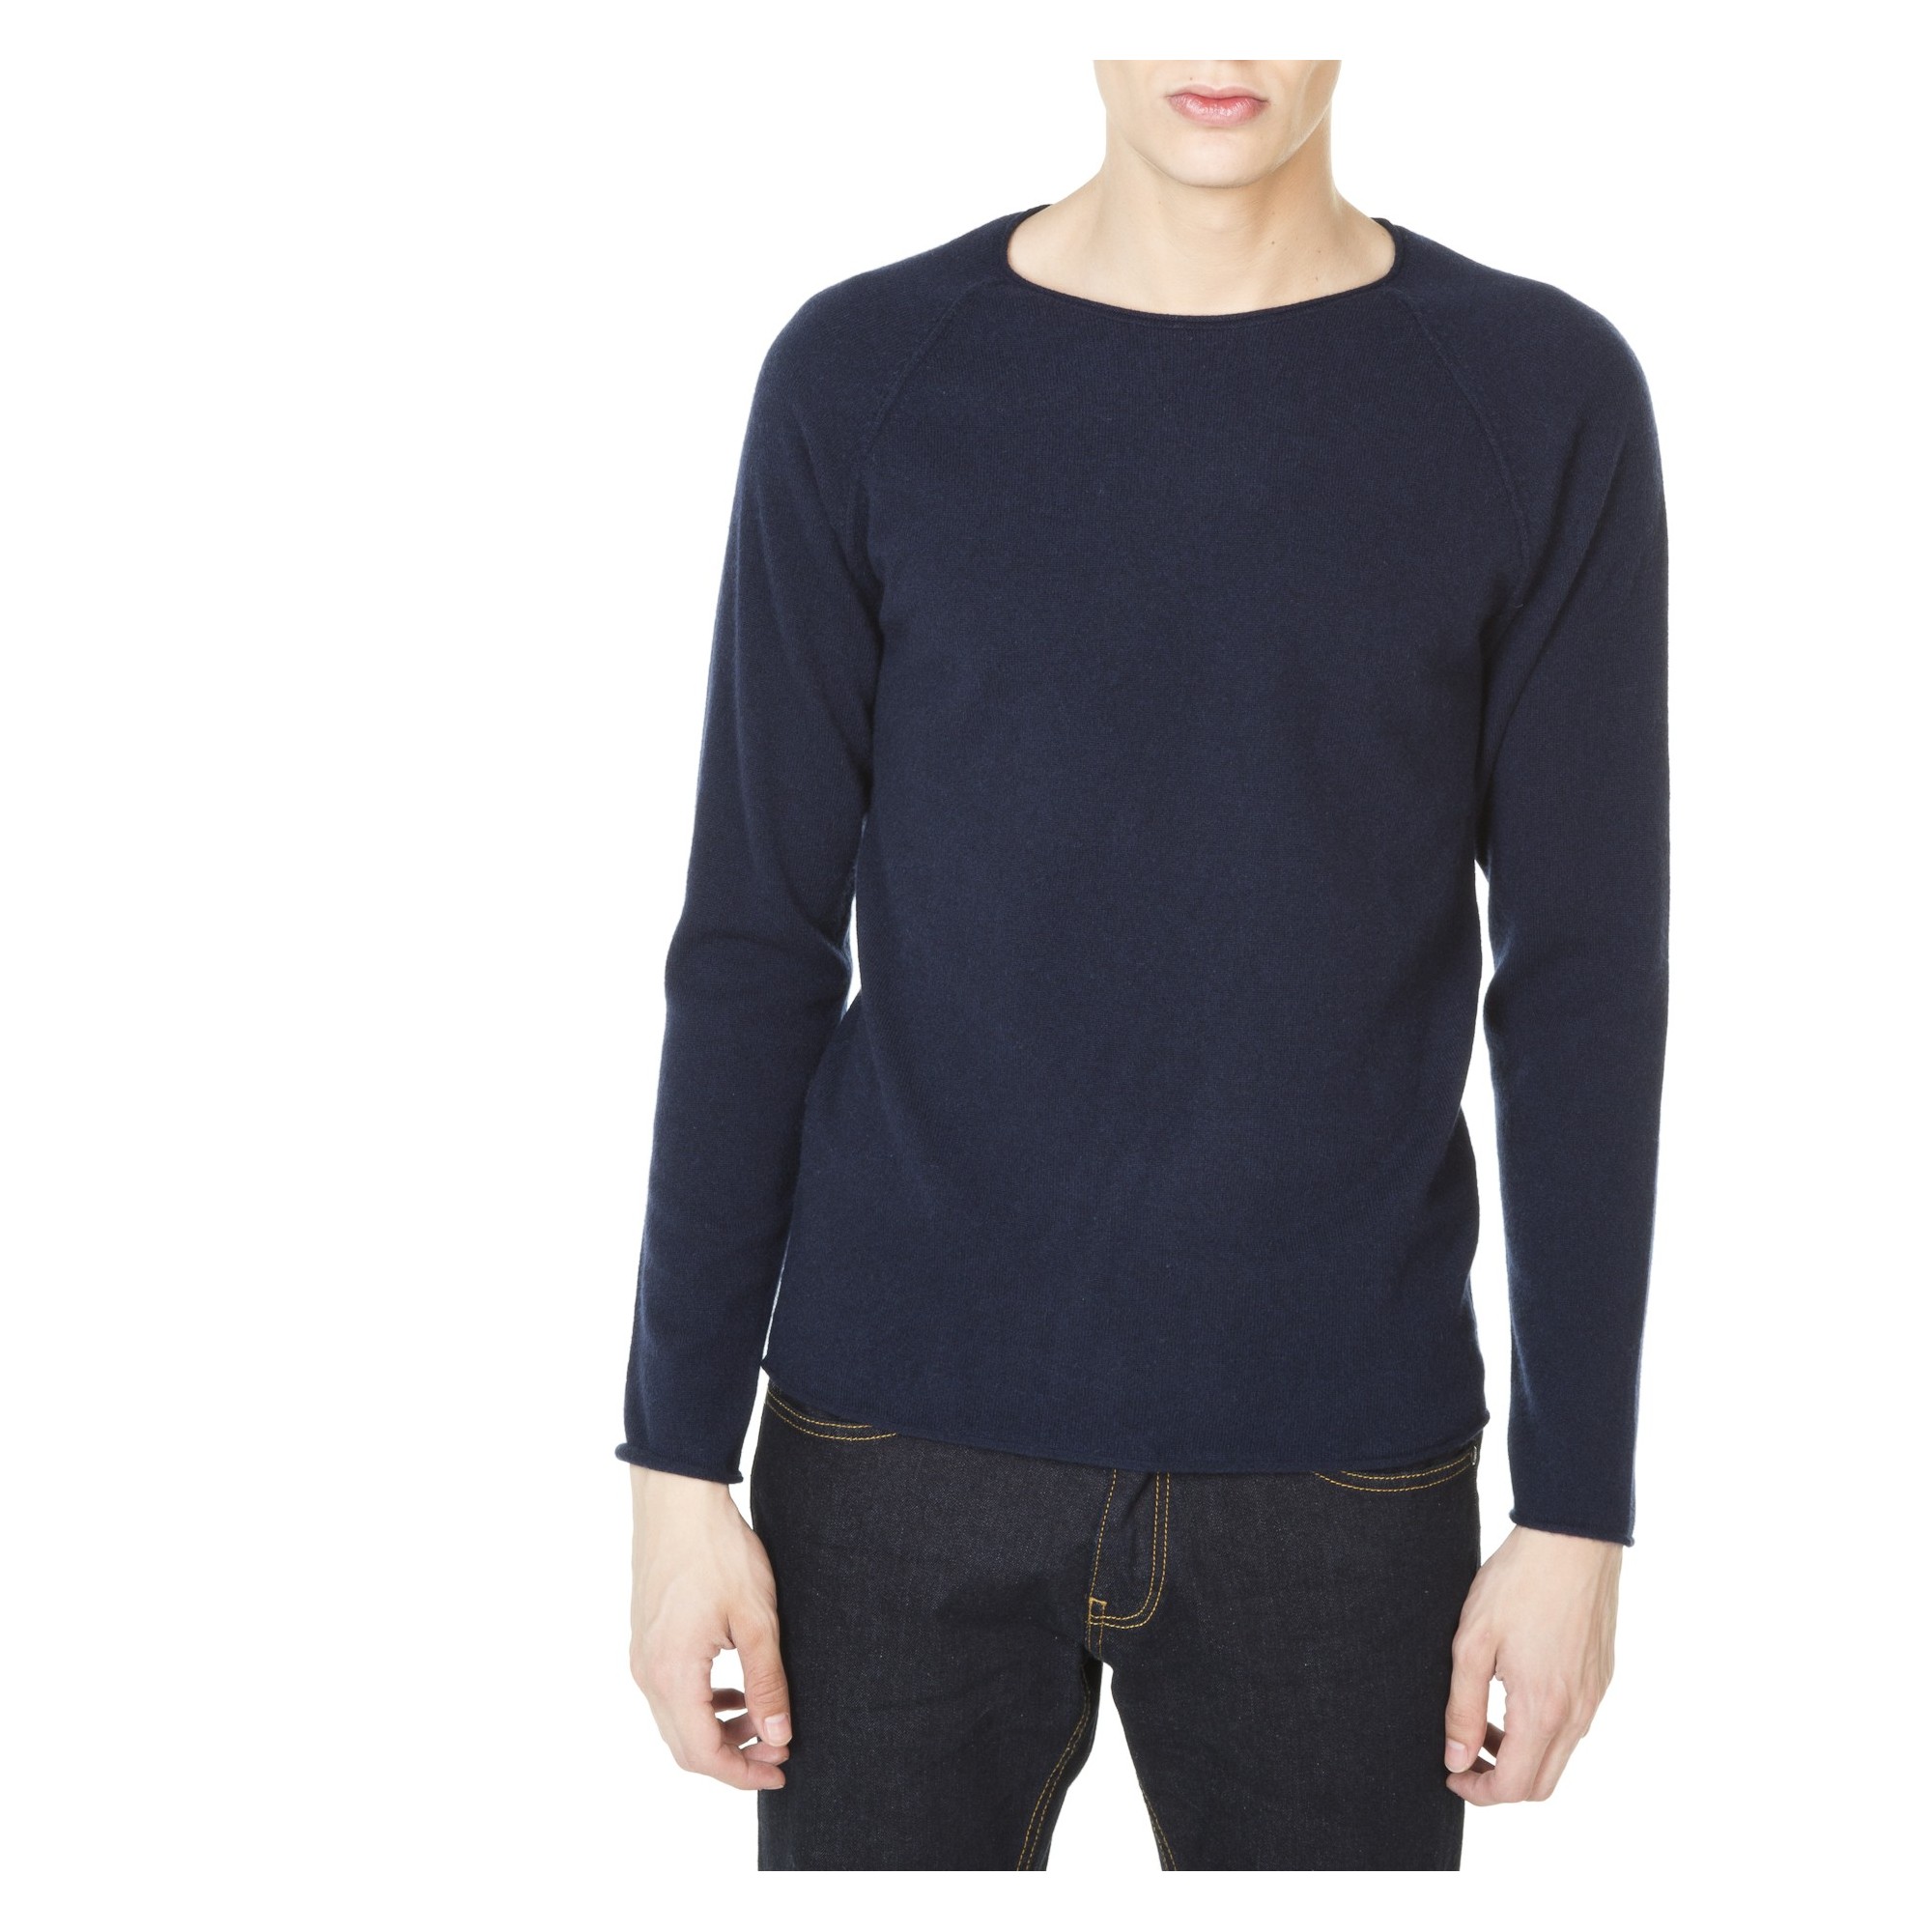 Round neck cashmere sweater for men